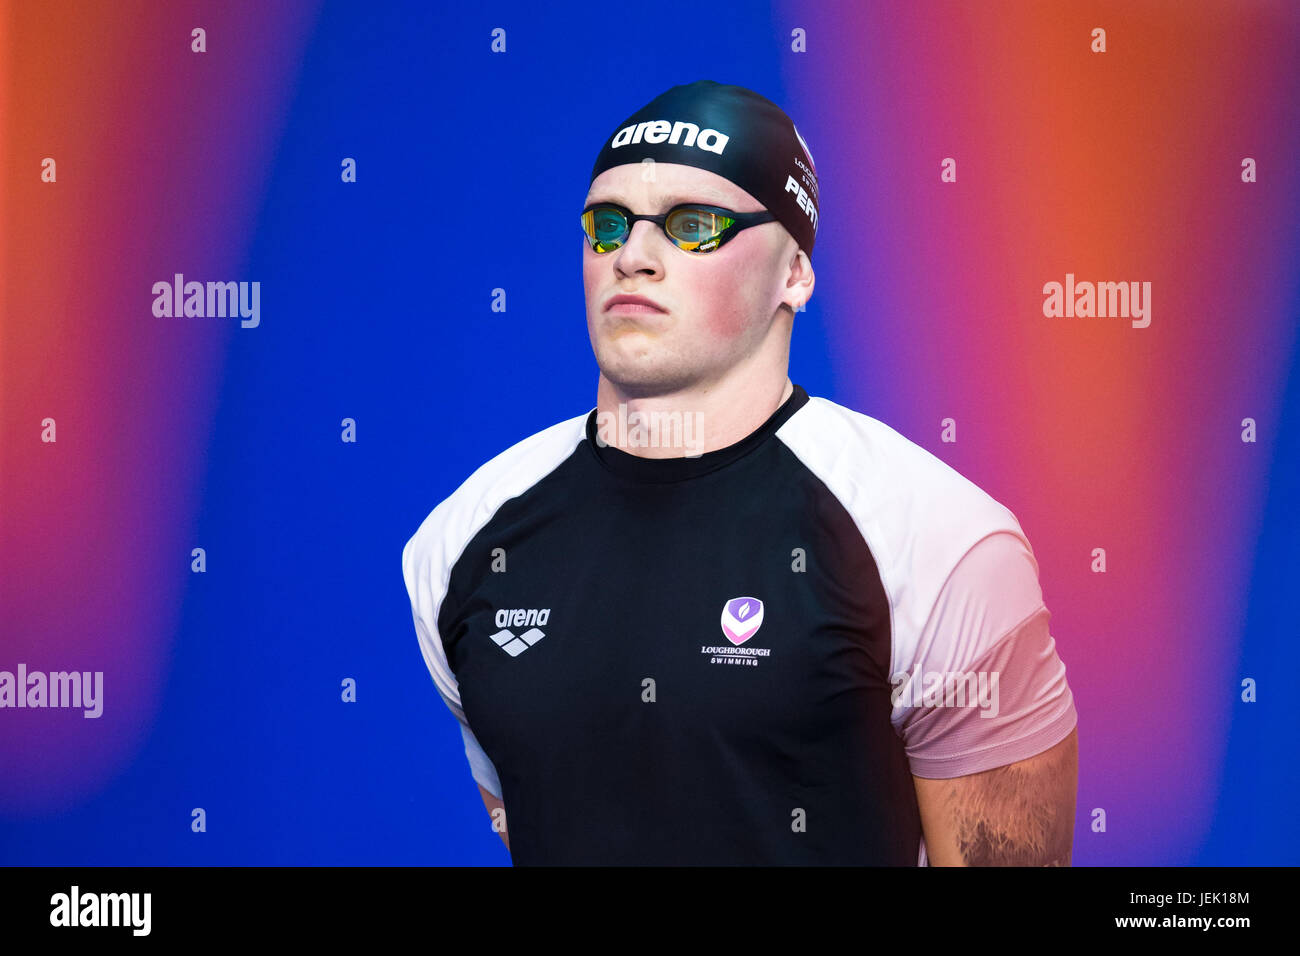 Adam Peaty prepares to compete in the British Swimming Championships at Ponds Forge, Sheffield on April, 18, 2017. Stock Photo